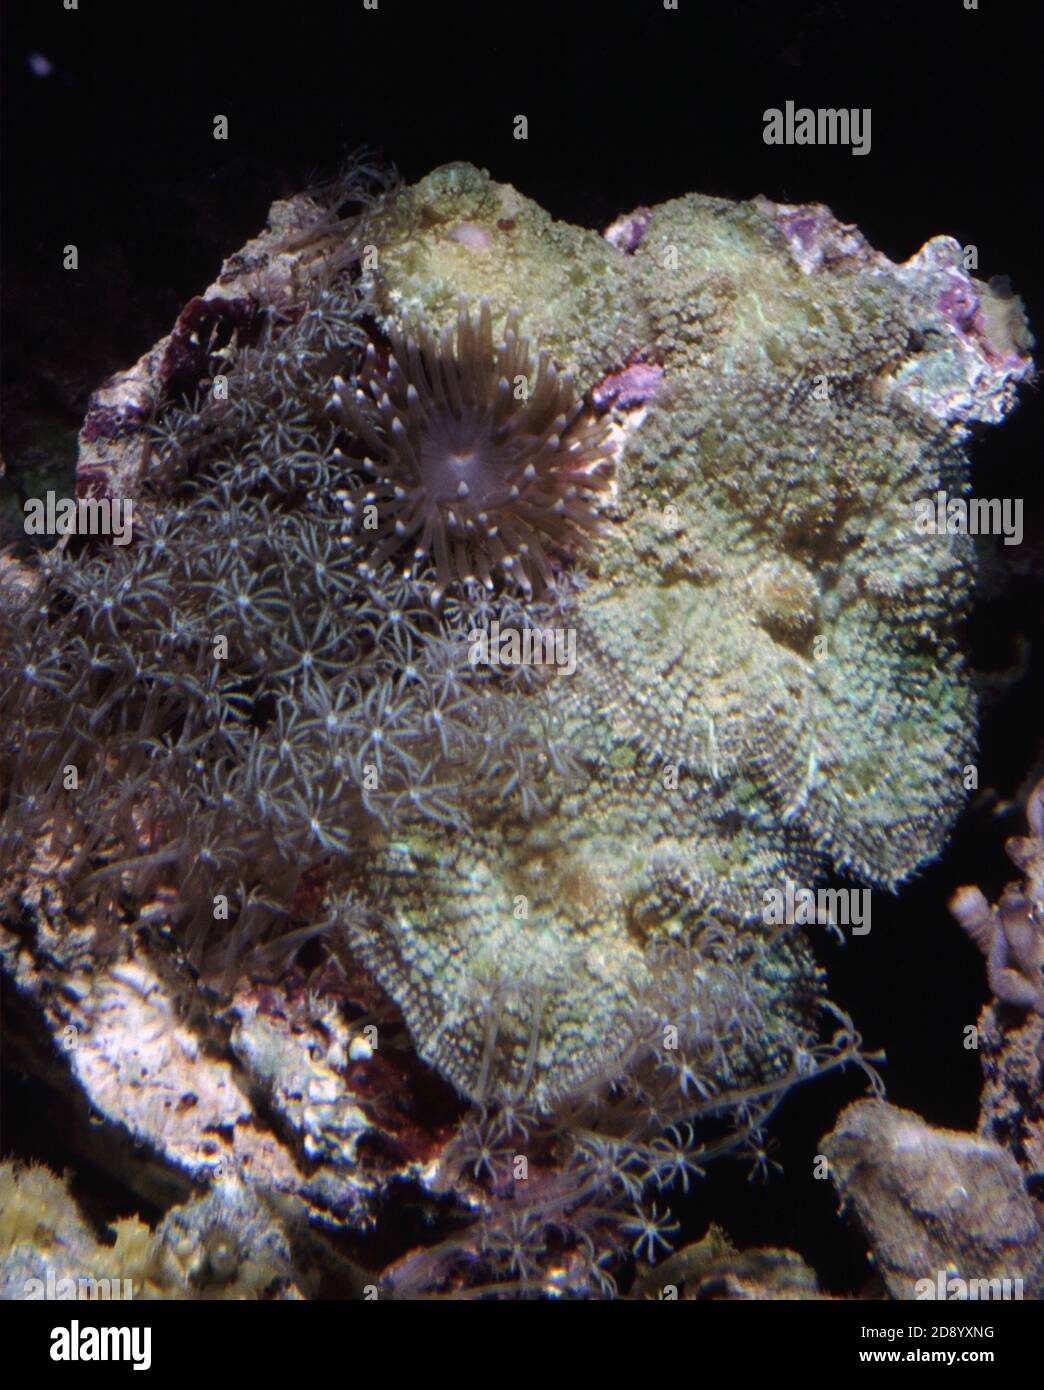 Mushroom corals (Discosoma sp.), Soft coral Waving Hand Anthelia sp. and Prolific anemone Triactis producta on same rock Stock Photo